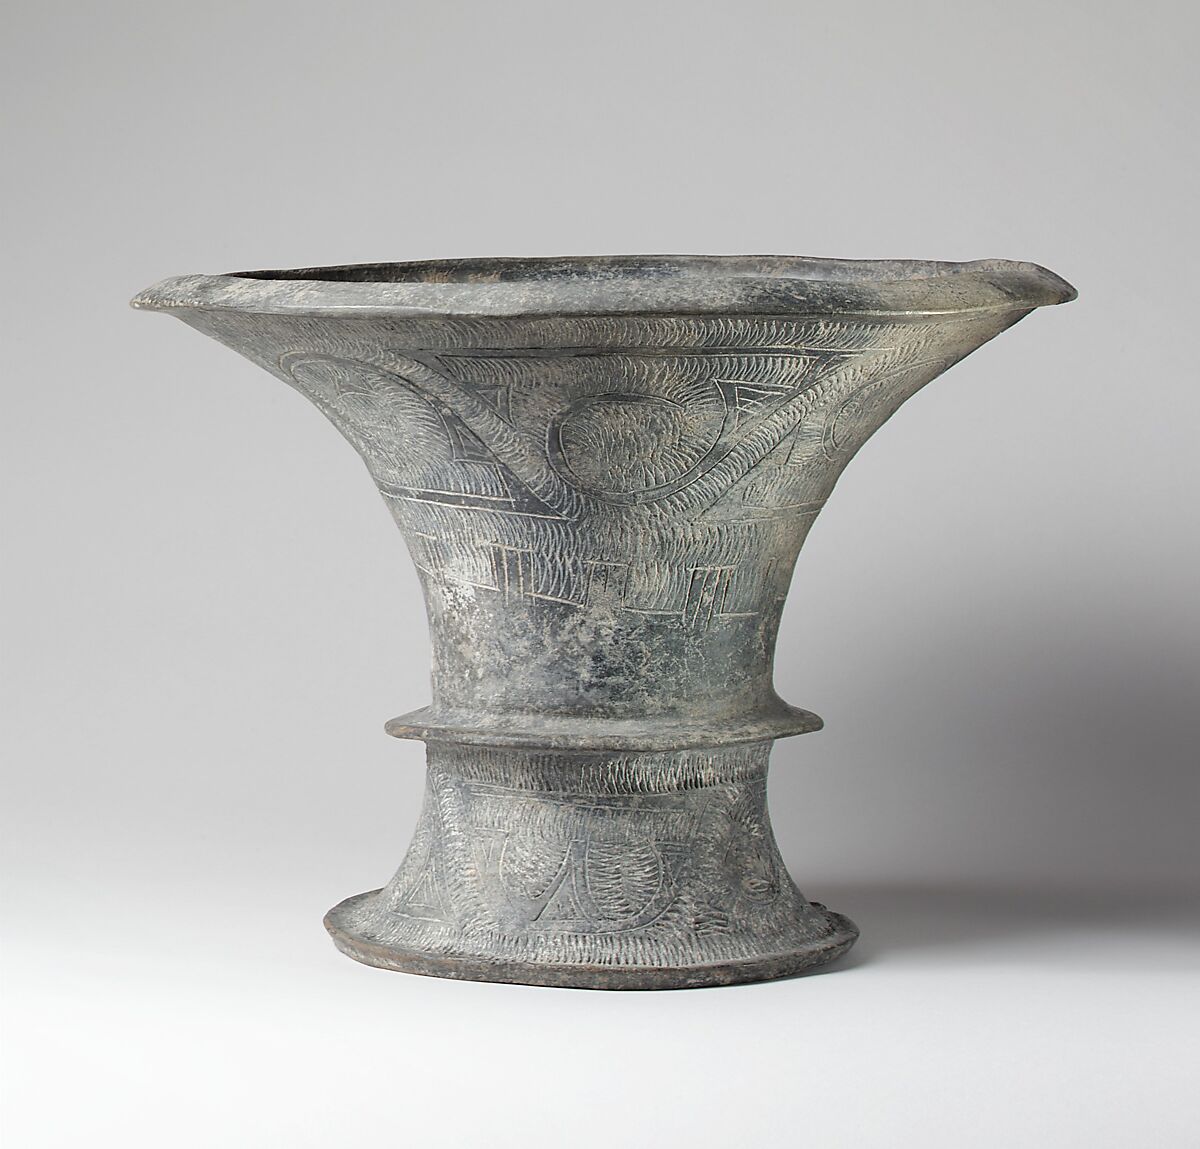 Vase with Incised and Impressed Designs, Earthenware (blackware), Thailand (Ban Chiang) 